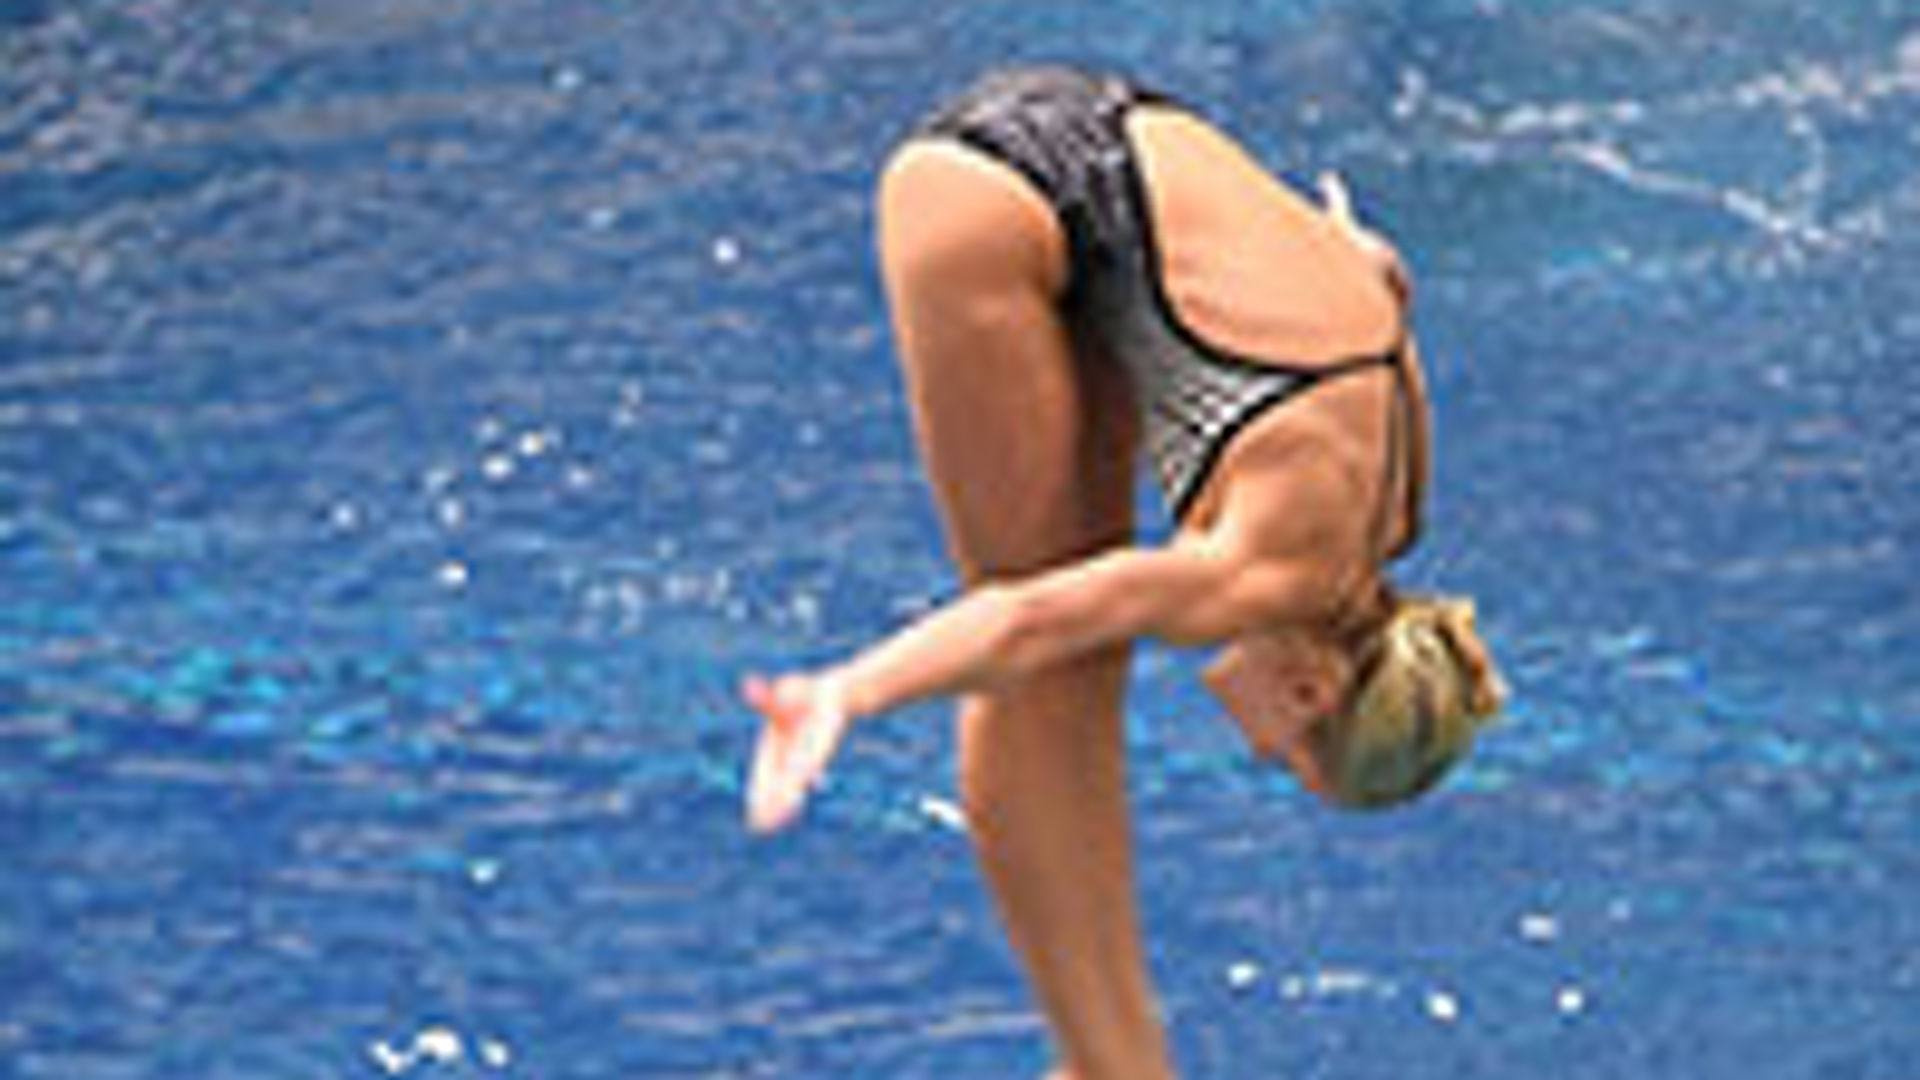 Swimmer diving into the water